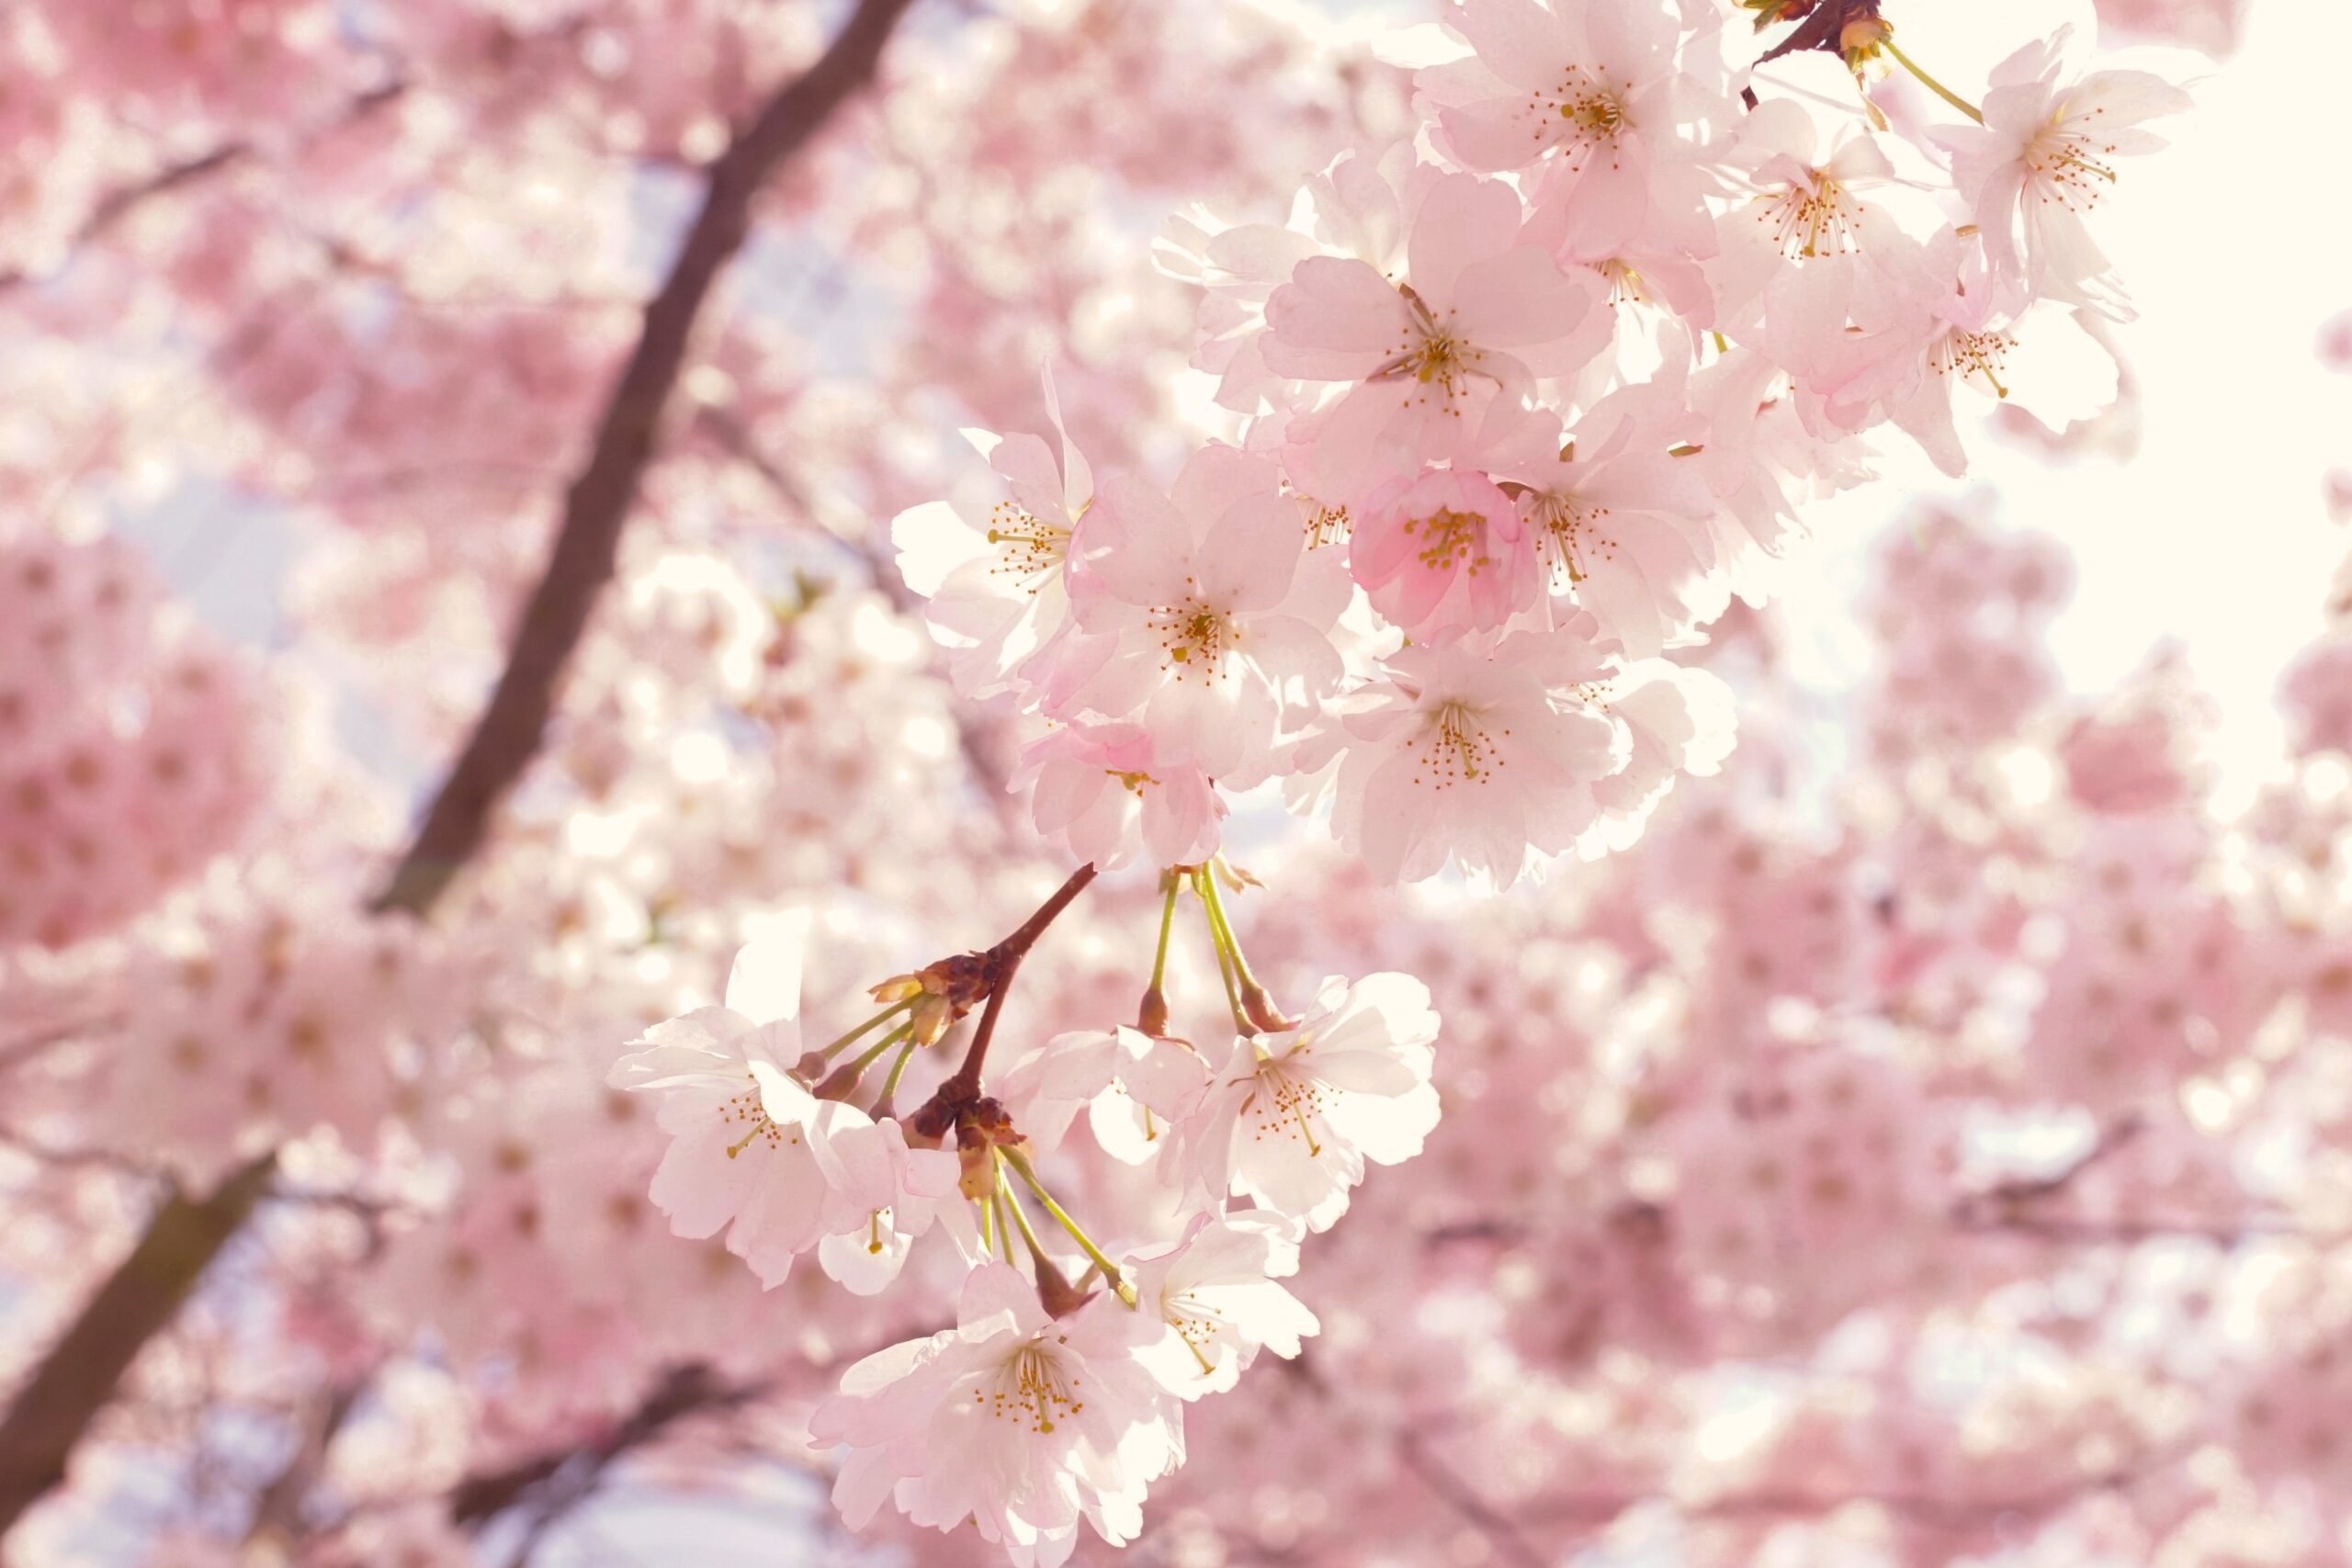 10 Places to Photograph Cherry Blossoms Around the World